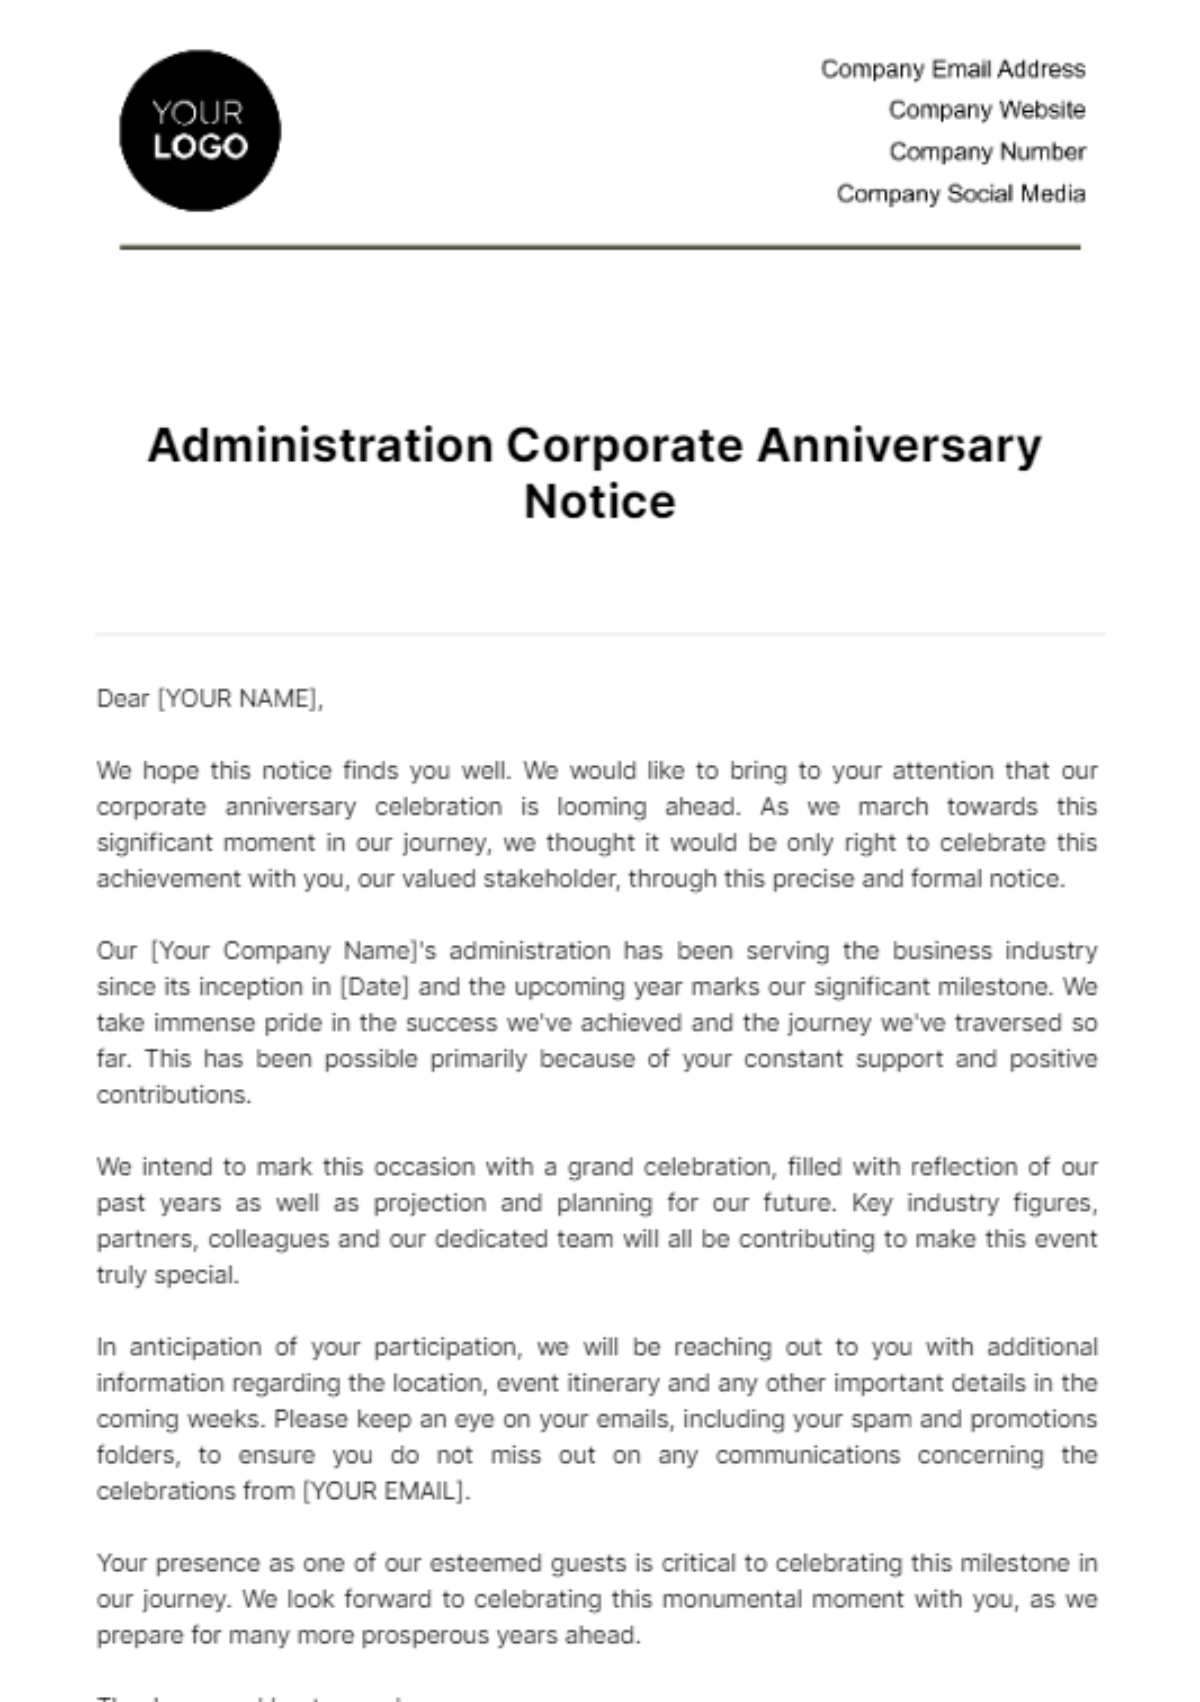 Free Administration Corporate Anniversary Notice Template